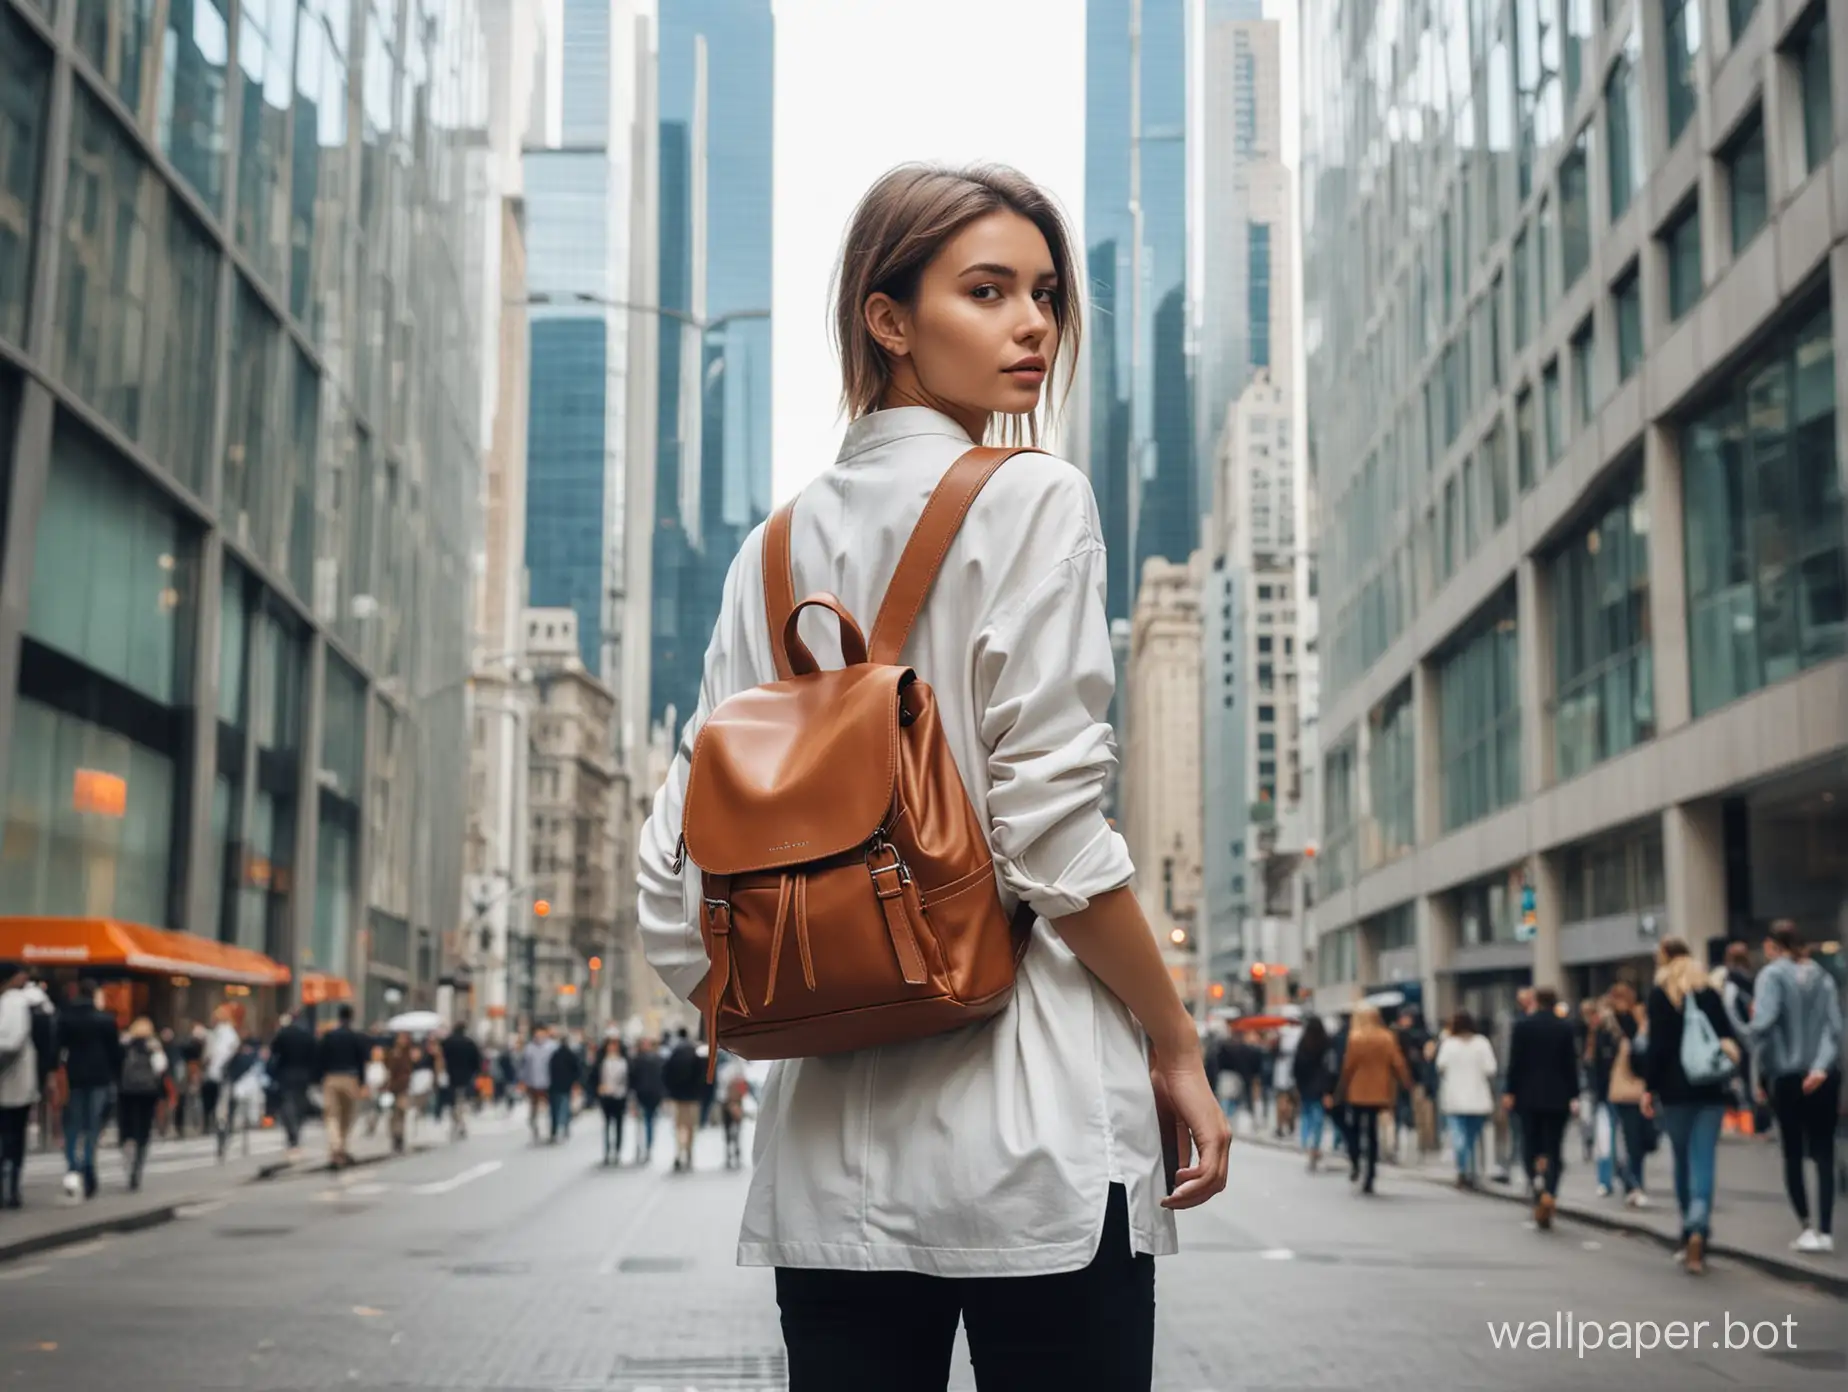 Stylish-Urban-Girl-with-Unisex-Backpack-in-Modern-Cityscape